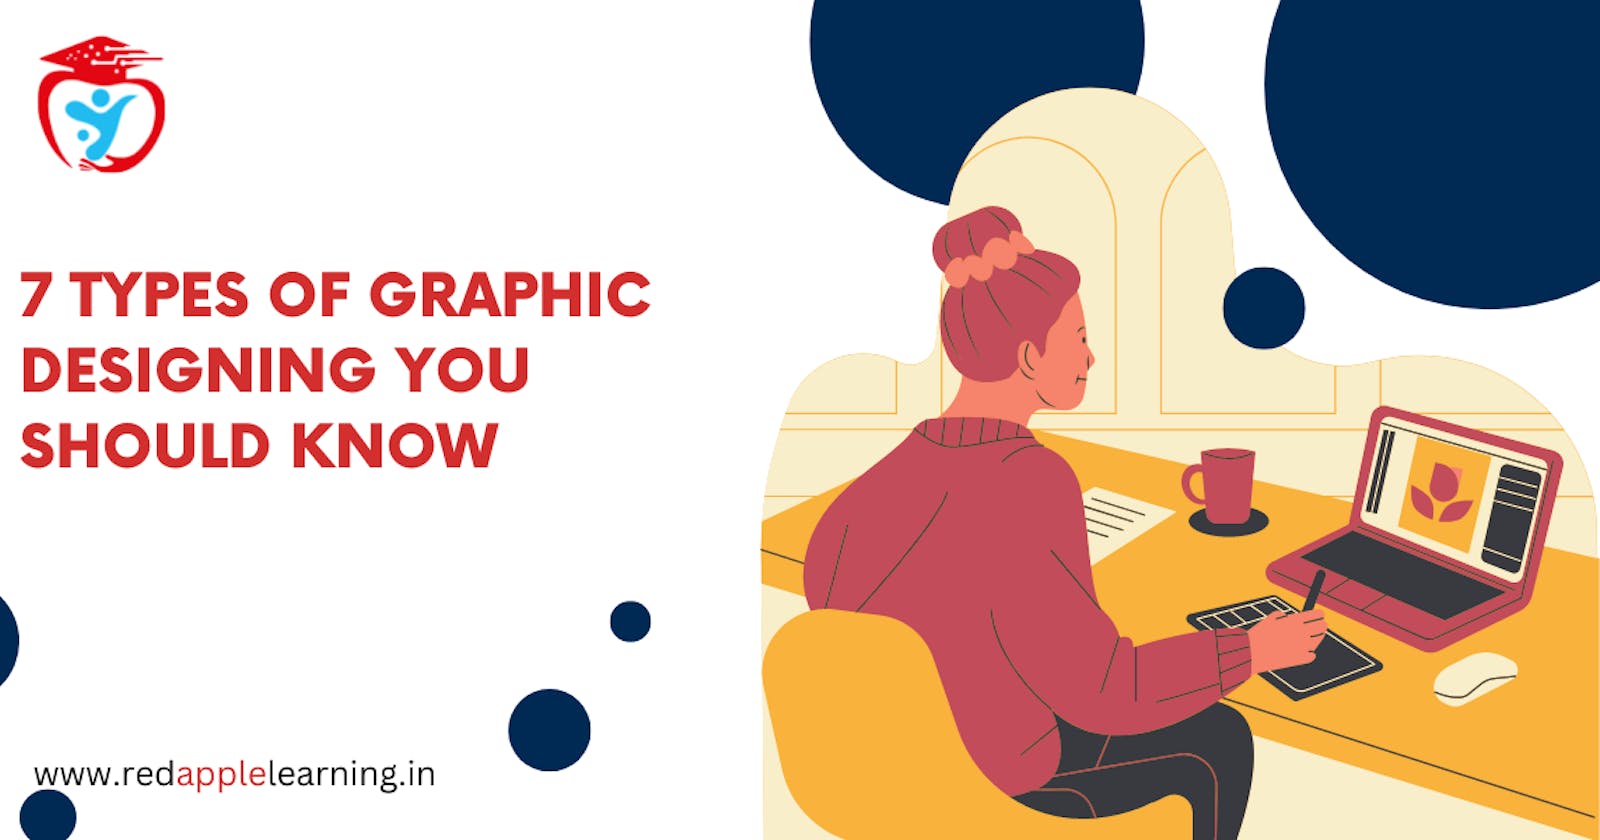 What are the 7 Types of Graphic Designing  You Need to Know?